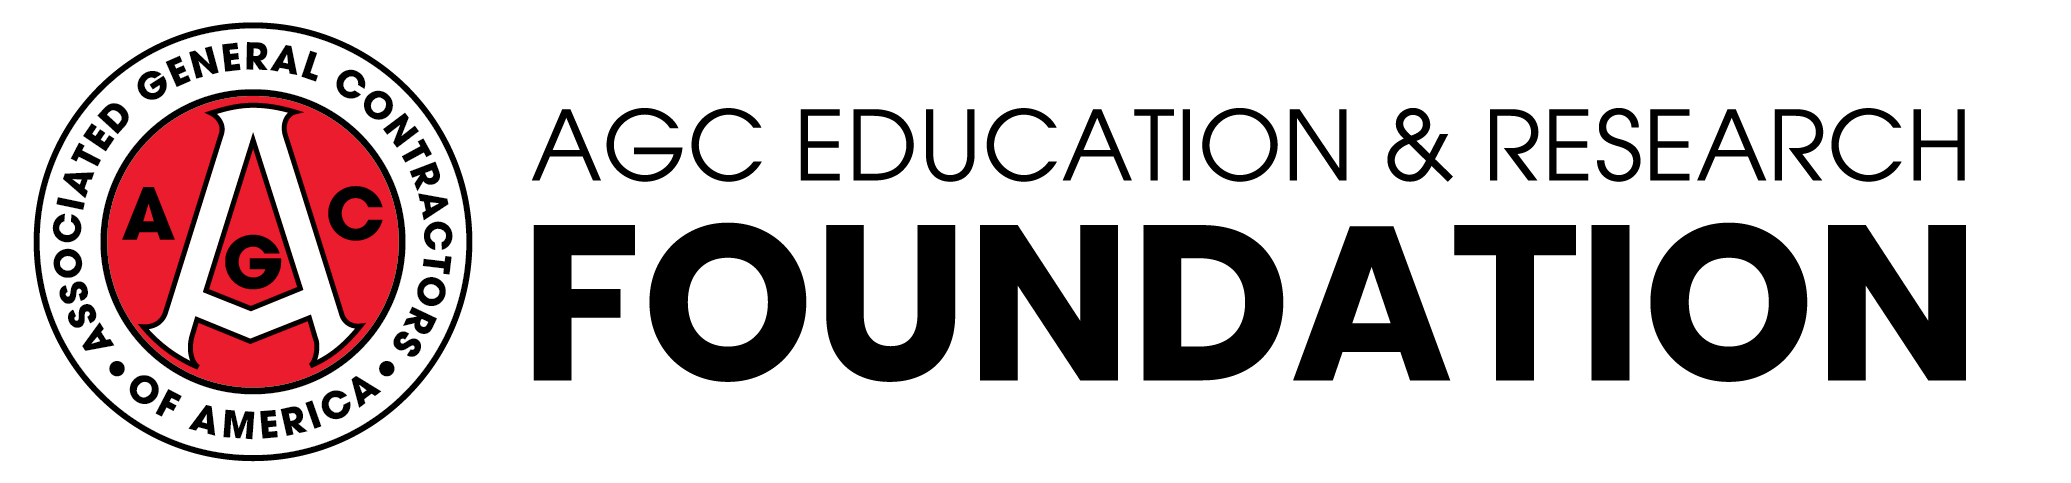 AGC Education and Research Foundation Logo